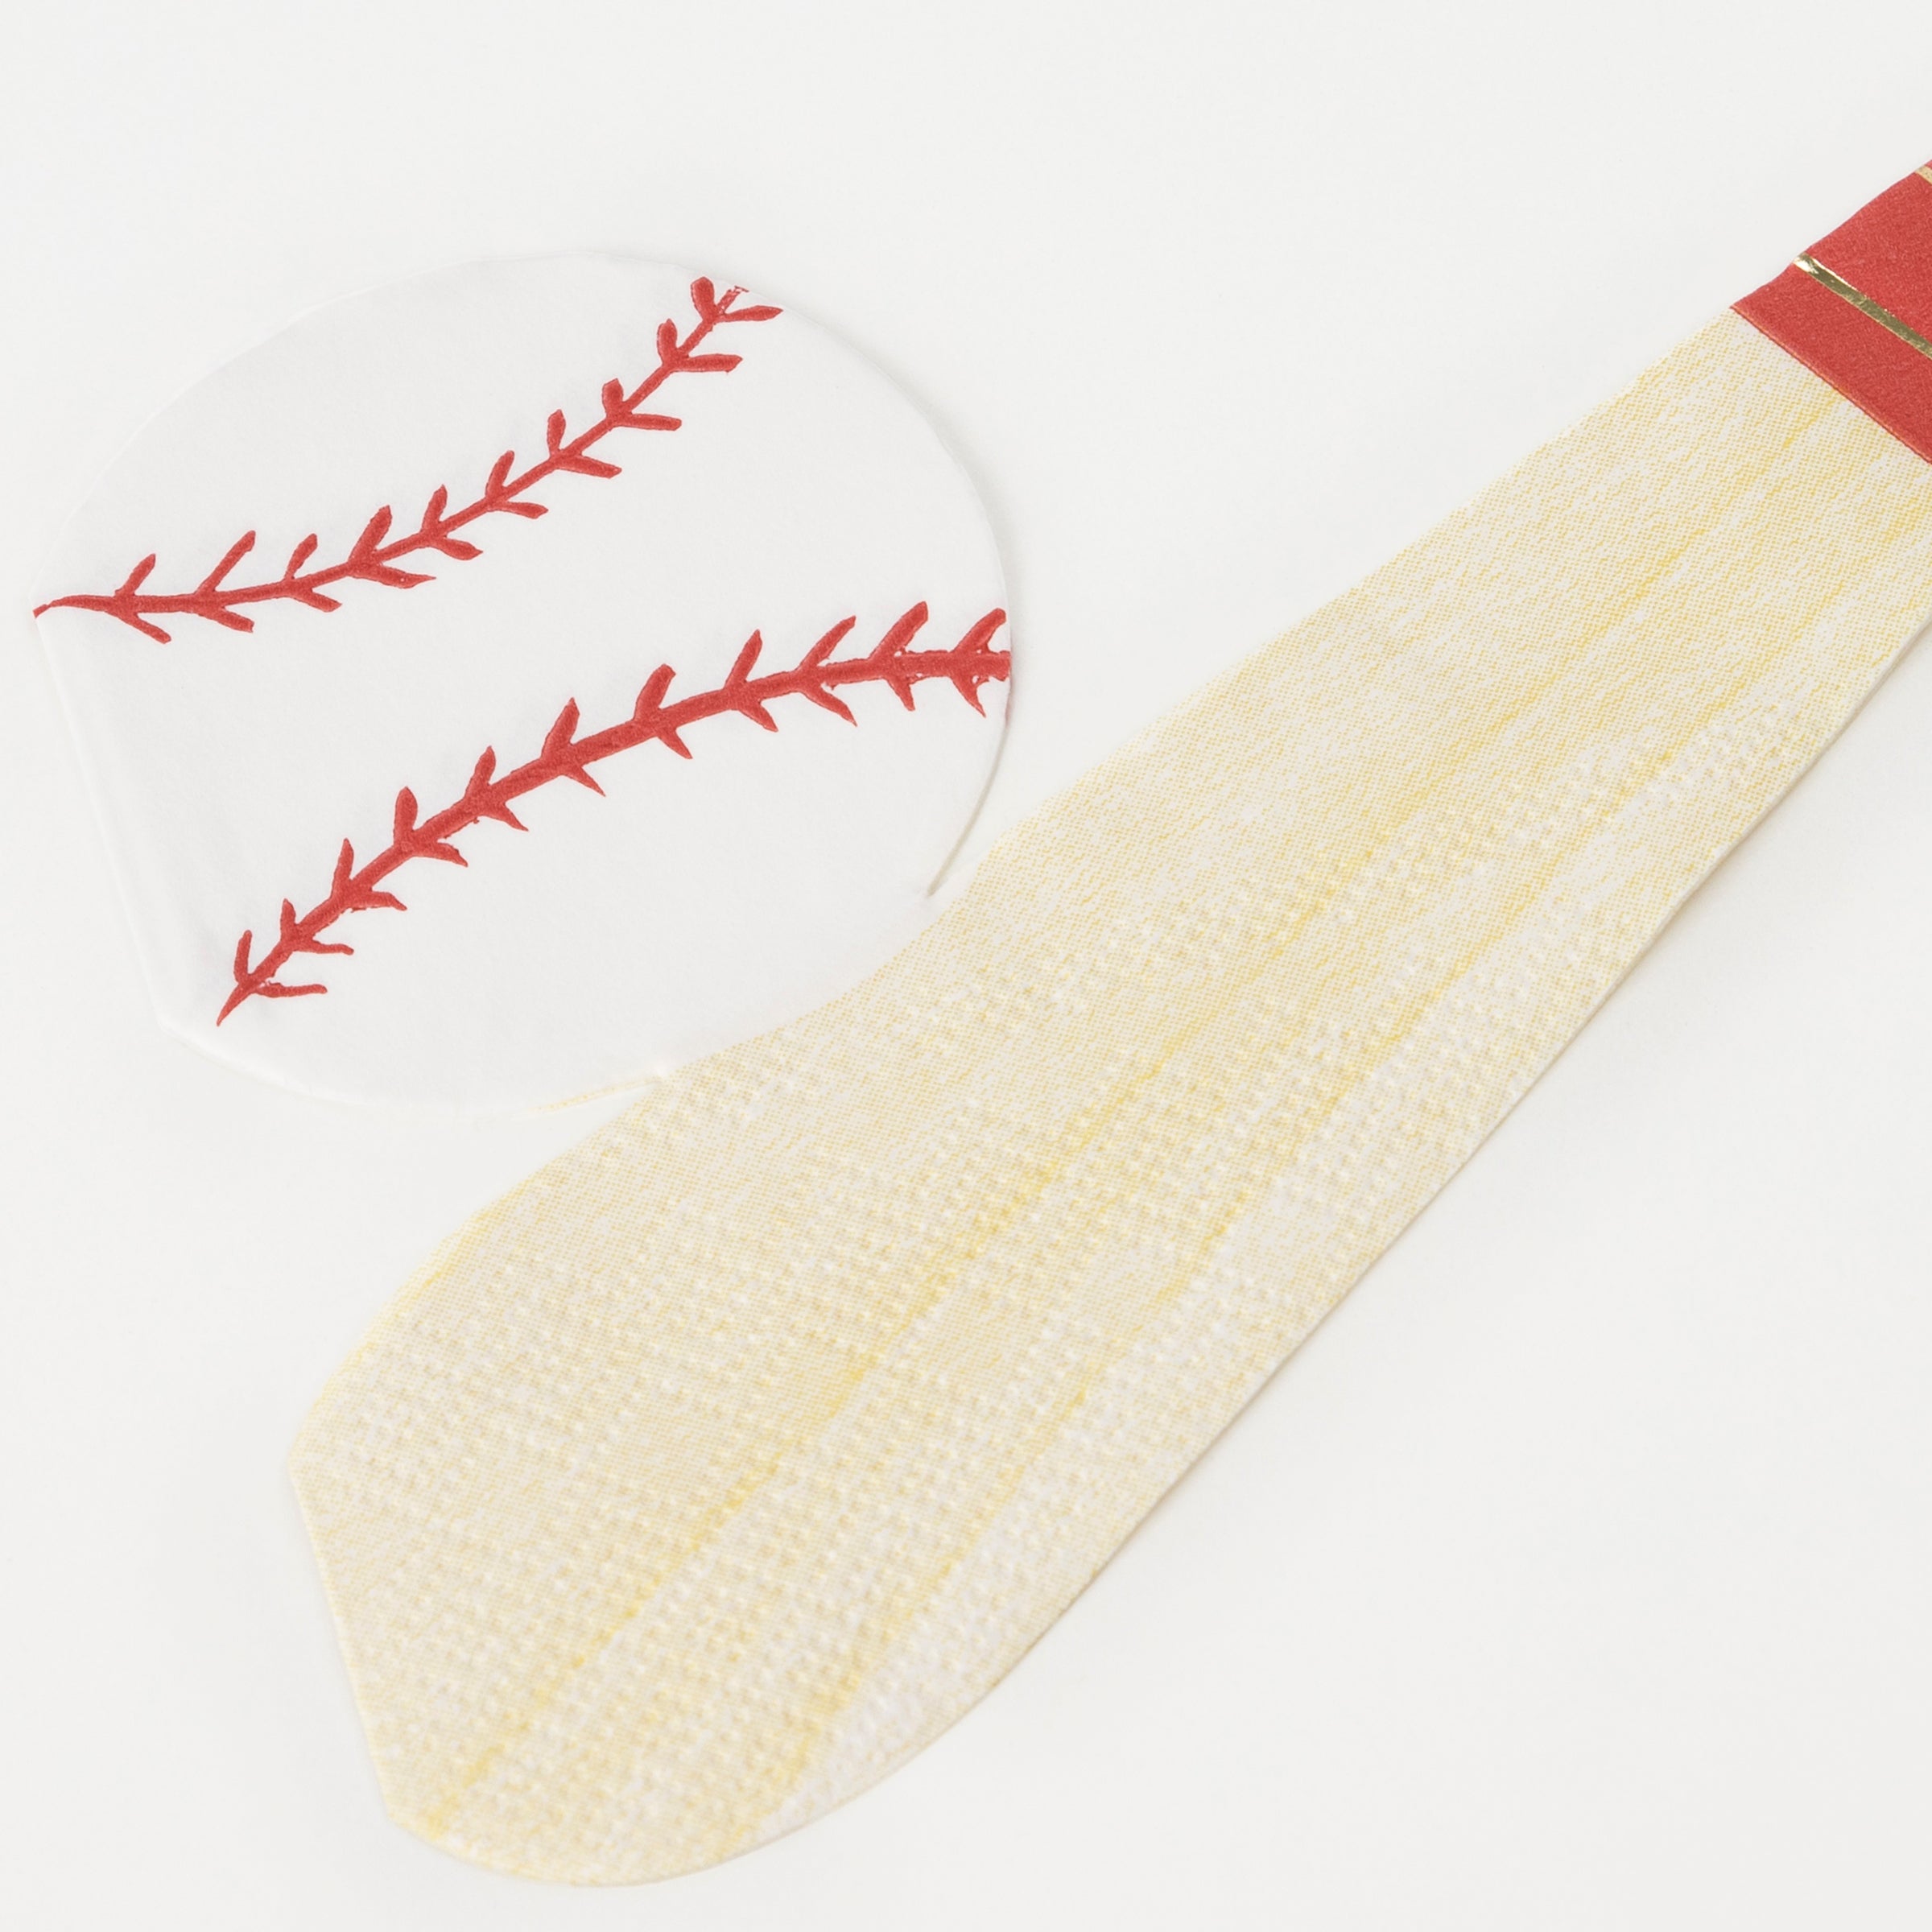 Our baseball napkins are perfect for a baseball birthday party.